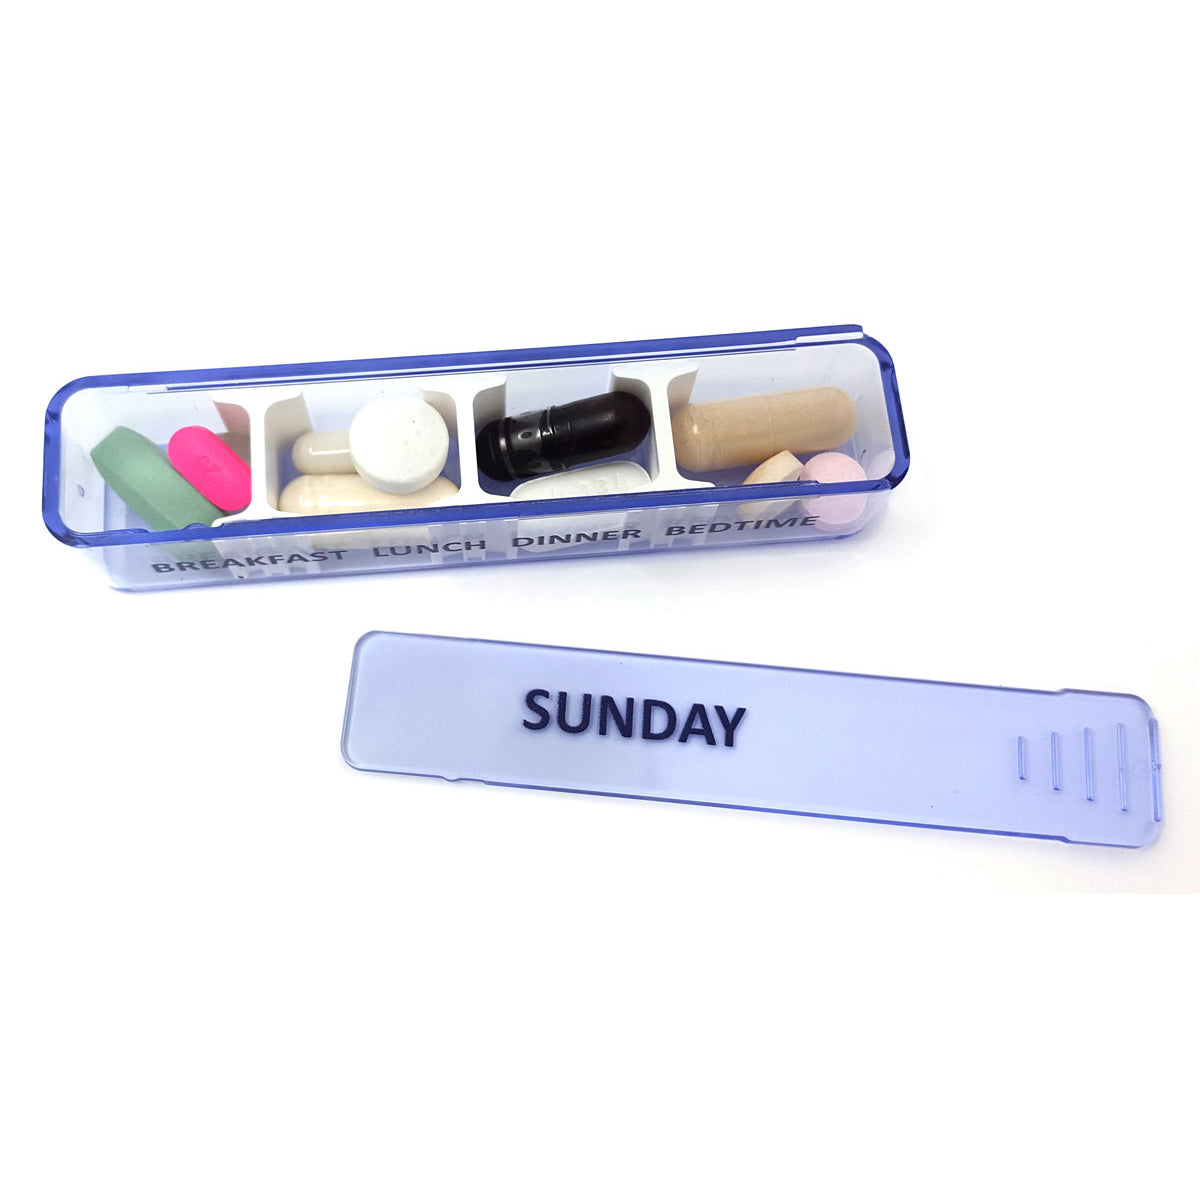 Weekly Danish Design Pill Box with Hard Cover Case Up to 4 Times a